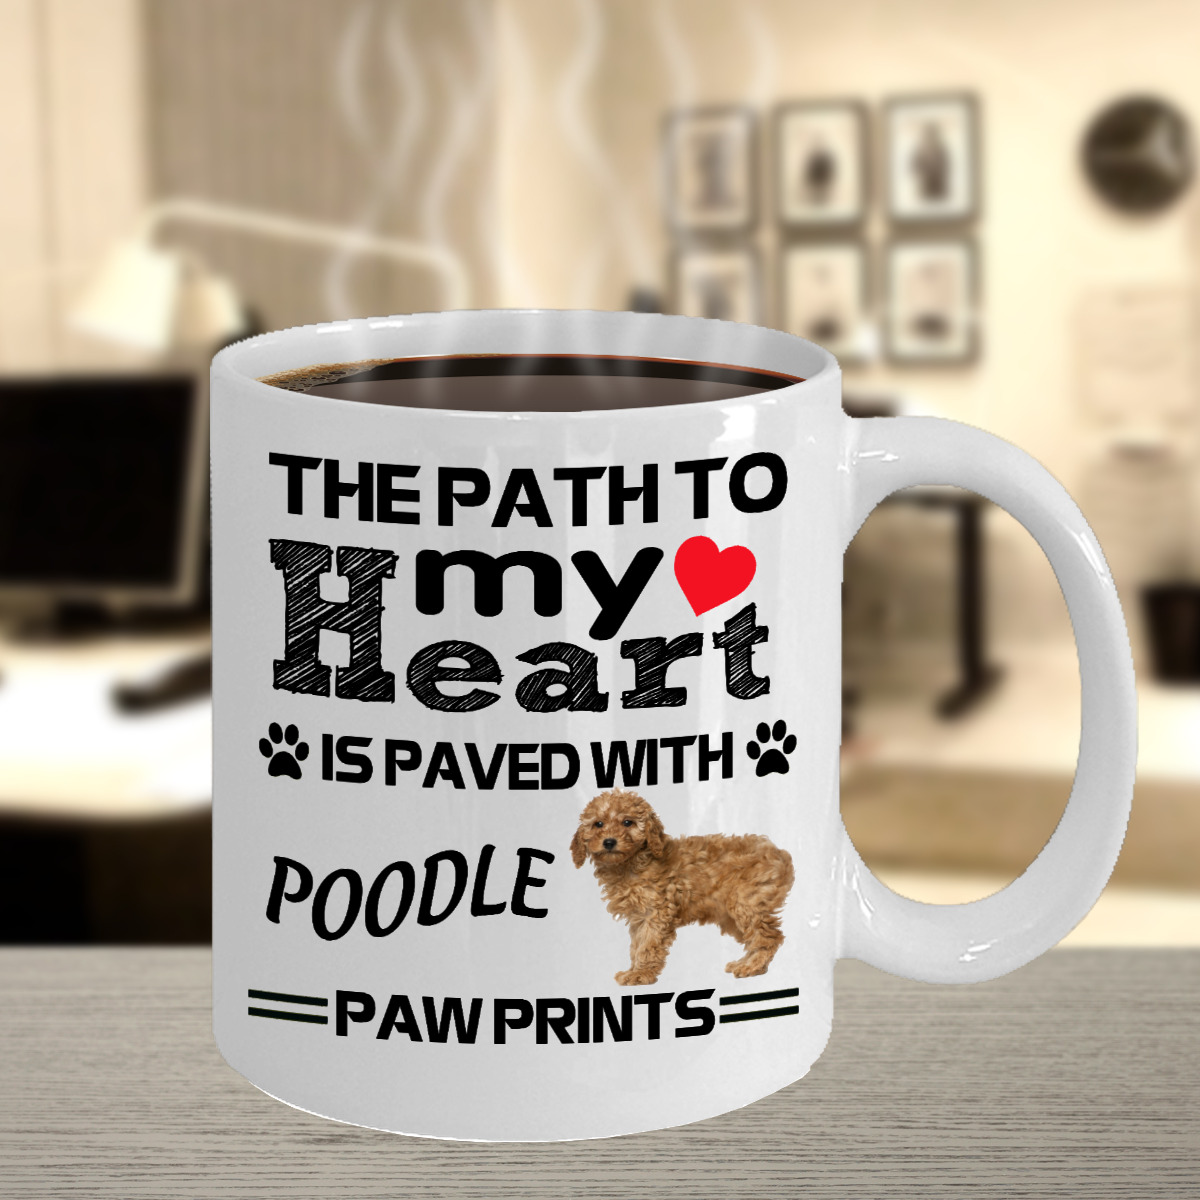 Poodle Dog,Standard Poodle,Gift Dog,Pudelhund,Caniche,Poodles,Cup,Coffee Mugs